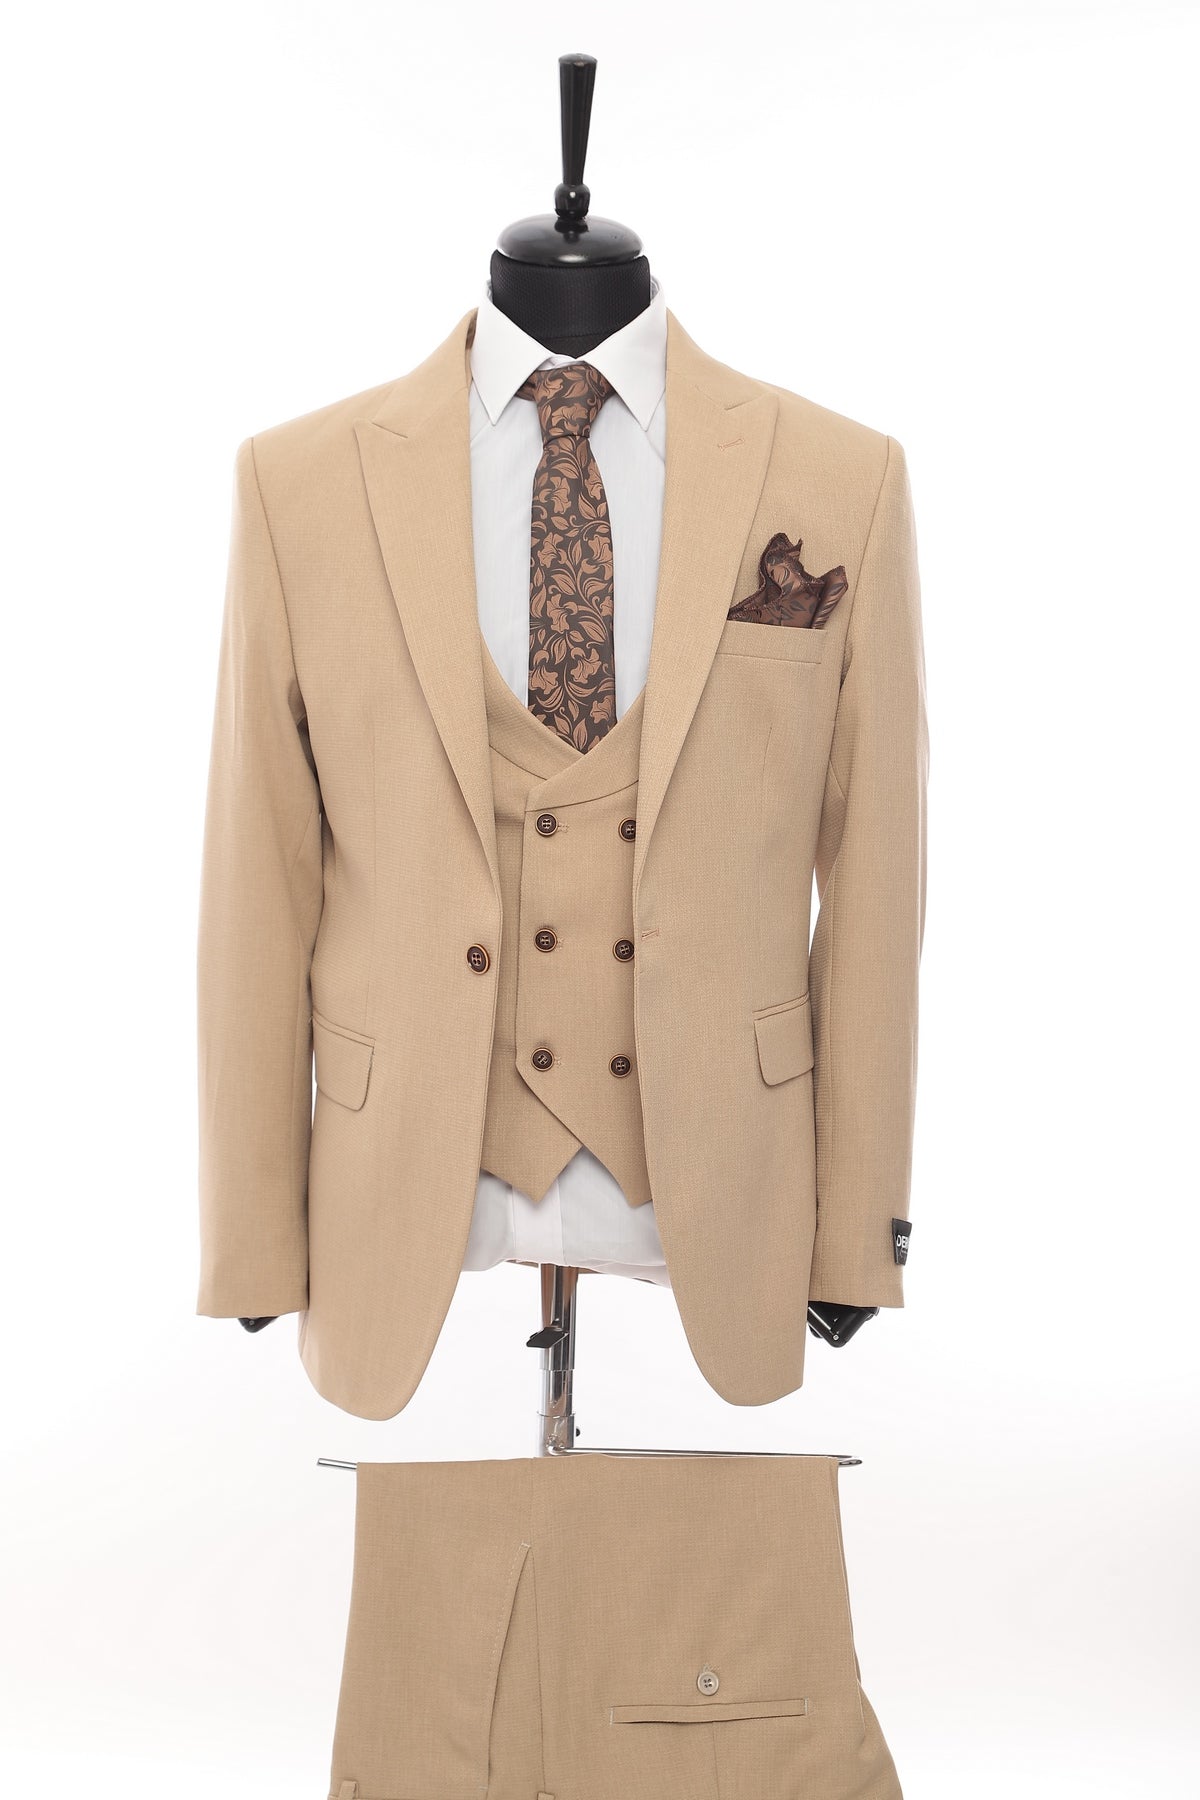 Cream Patterned Fabric Luxury Suit 3 Pieces